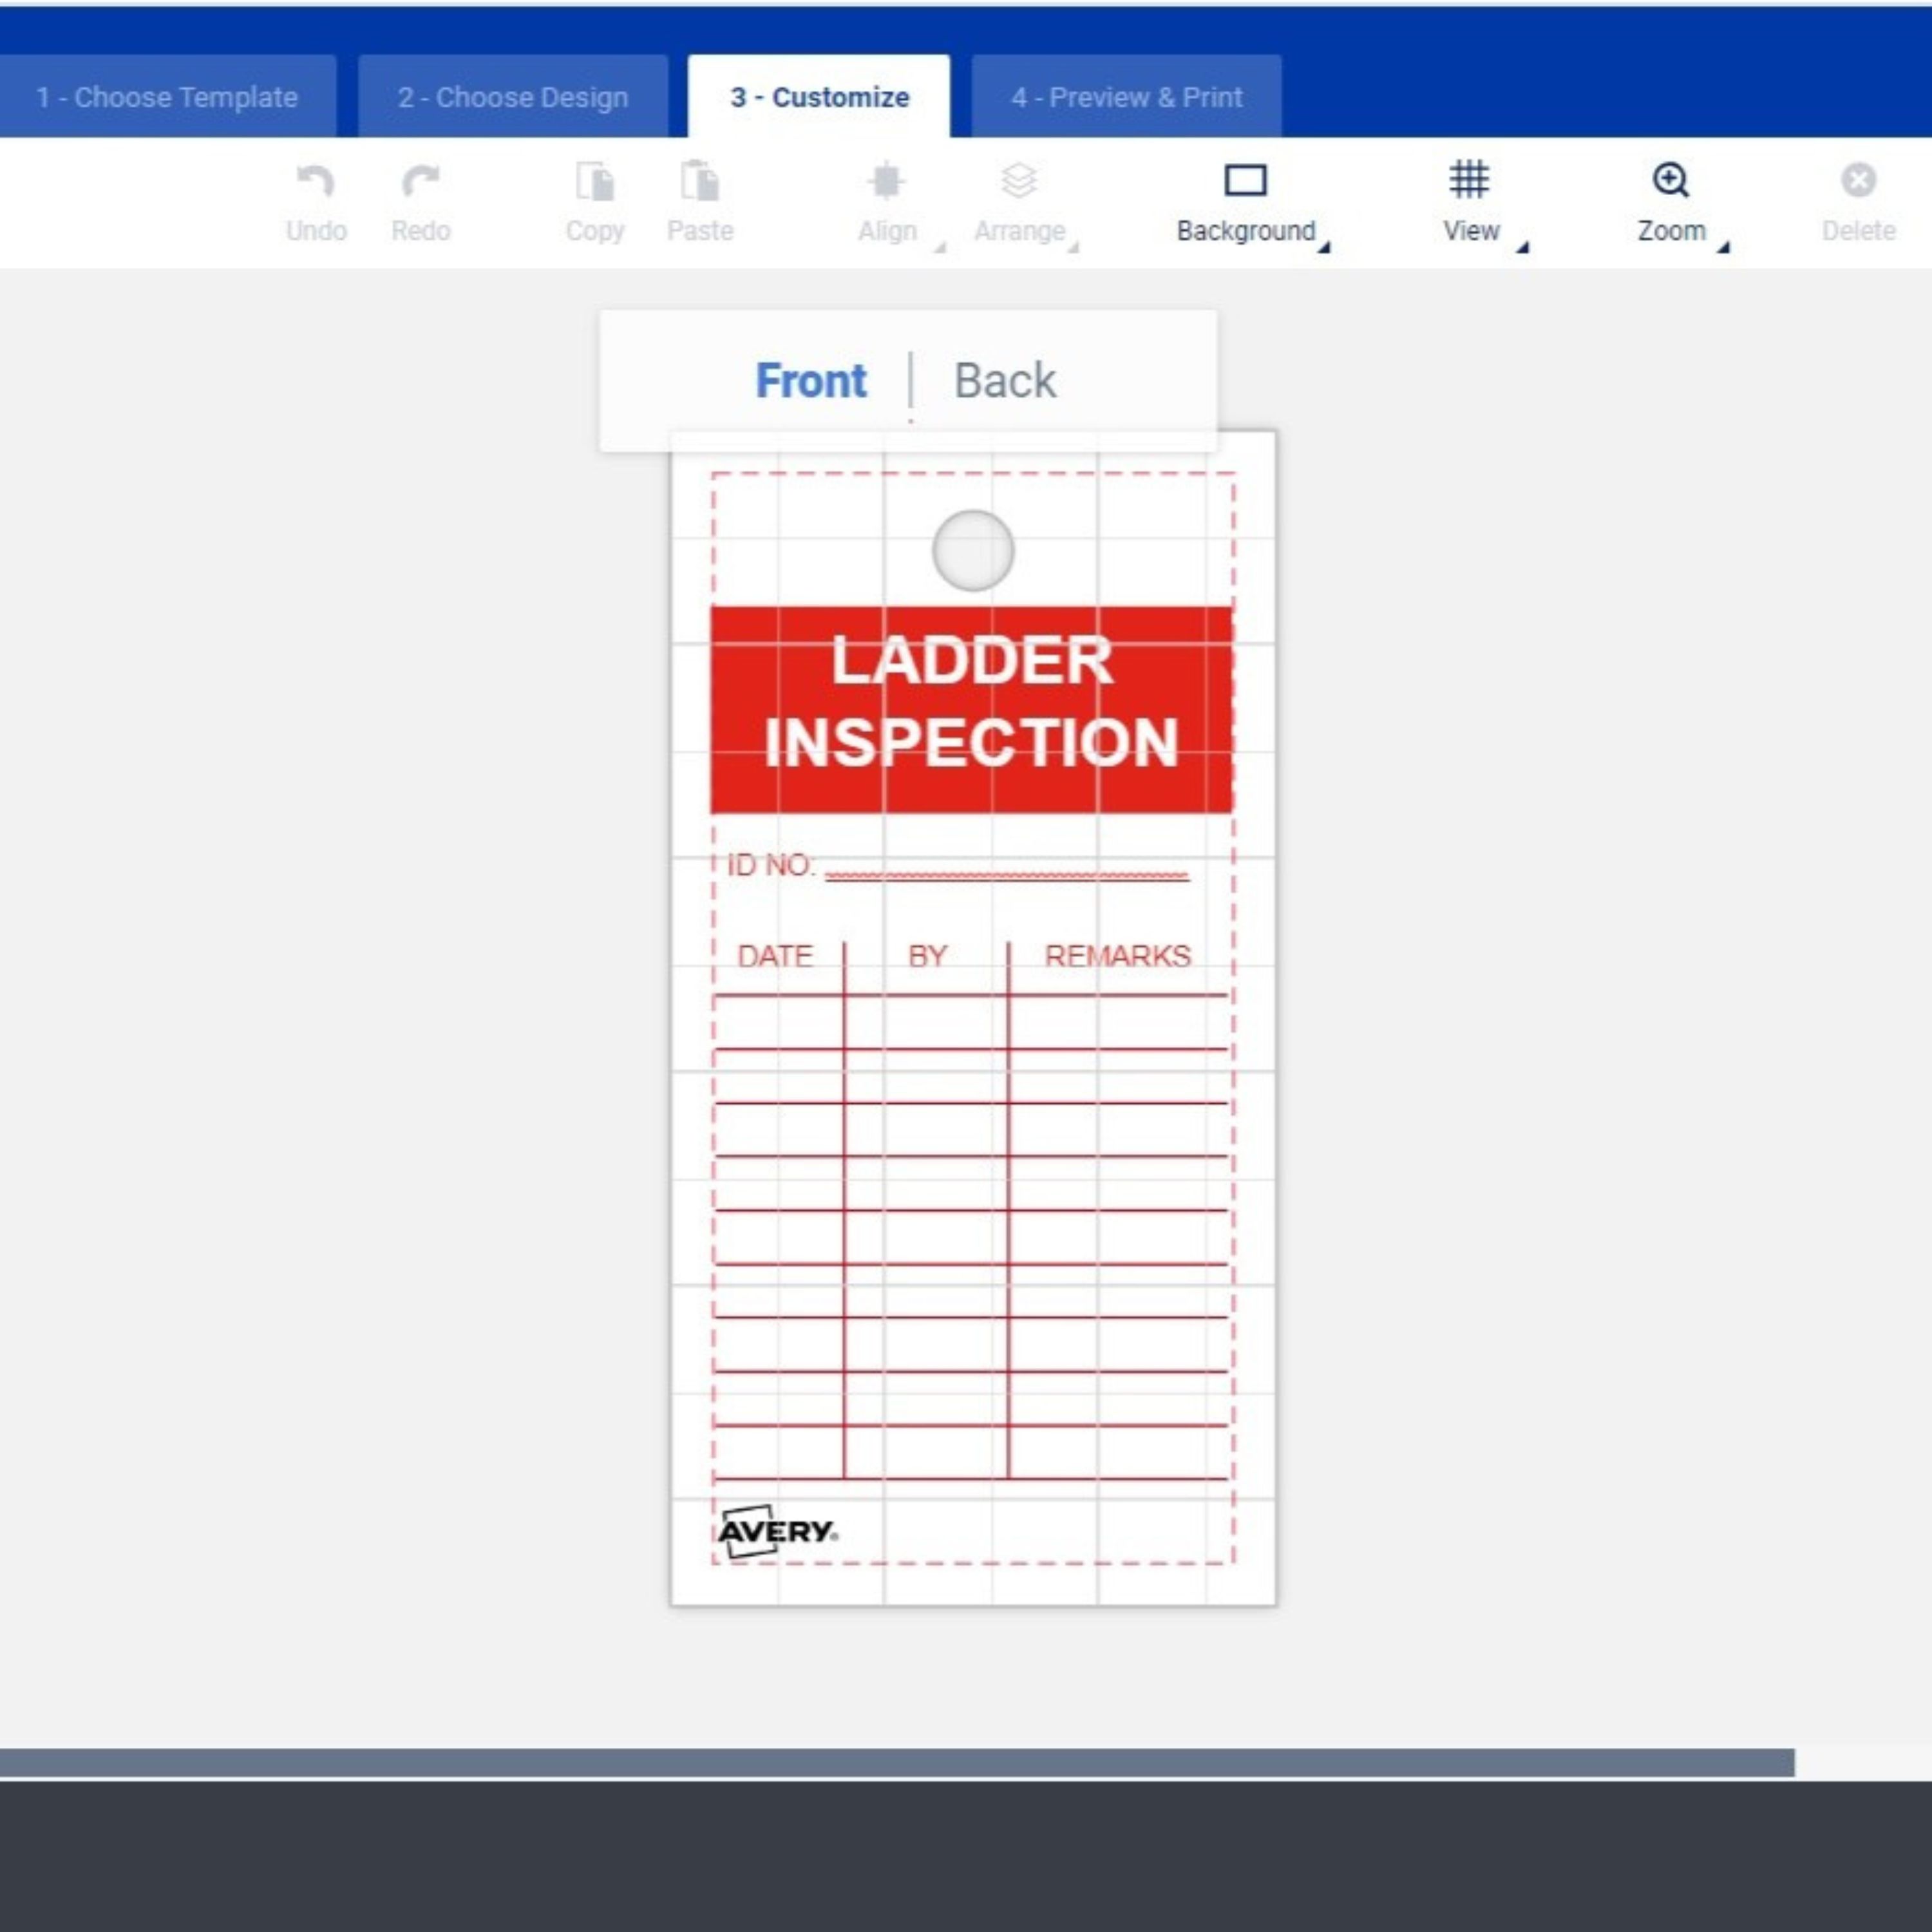 Free Avery template for ladder inspection tags. The image is a screenshot of the Avery Design and Print Online editor showing how to edit the front and back of the tag.